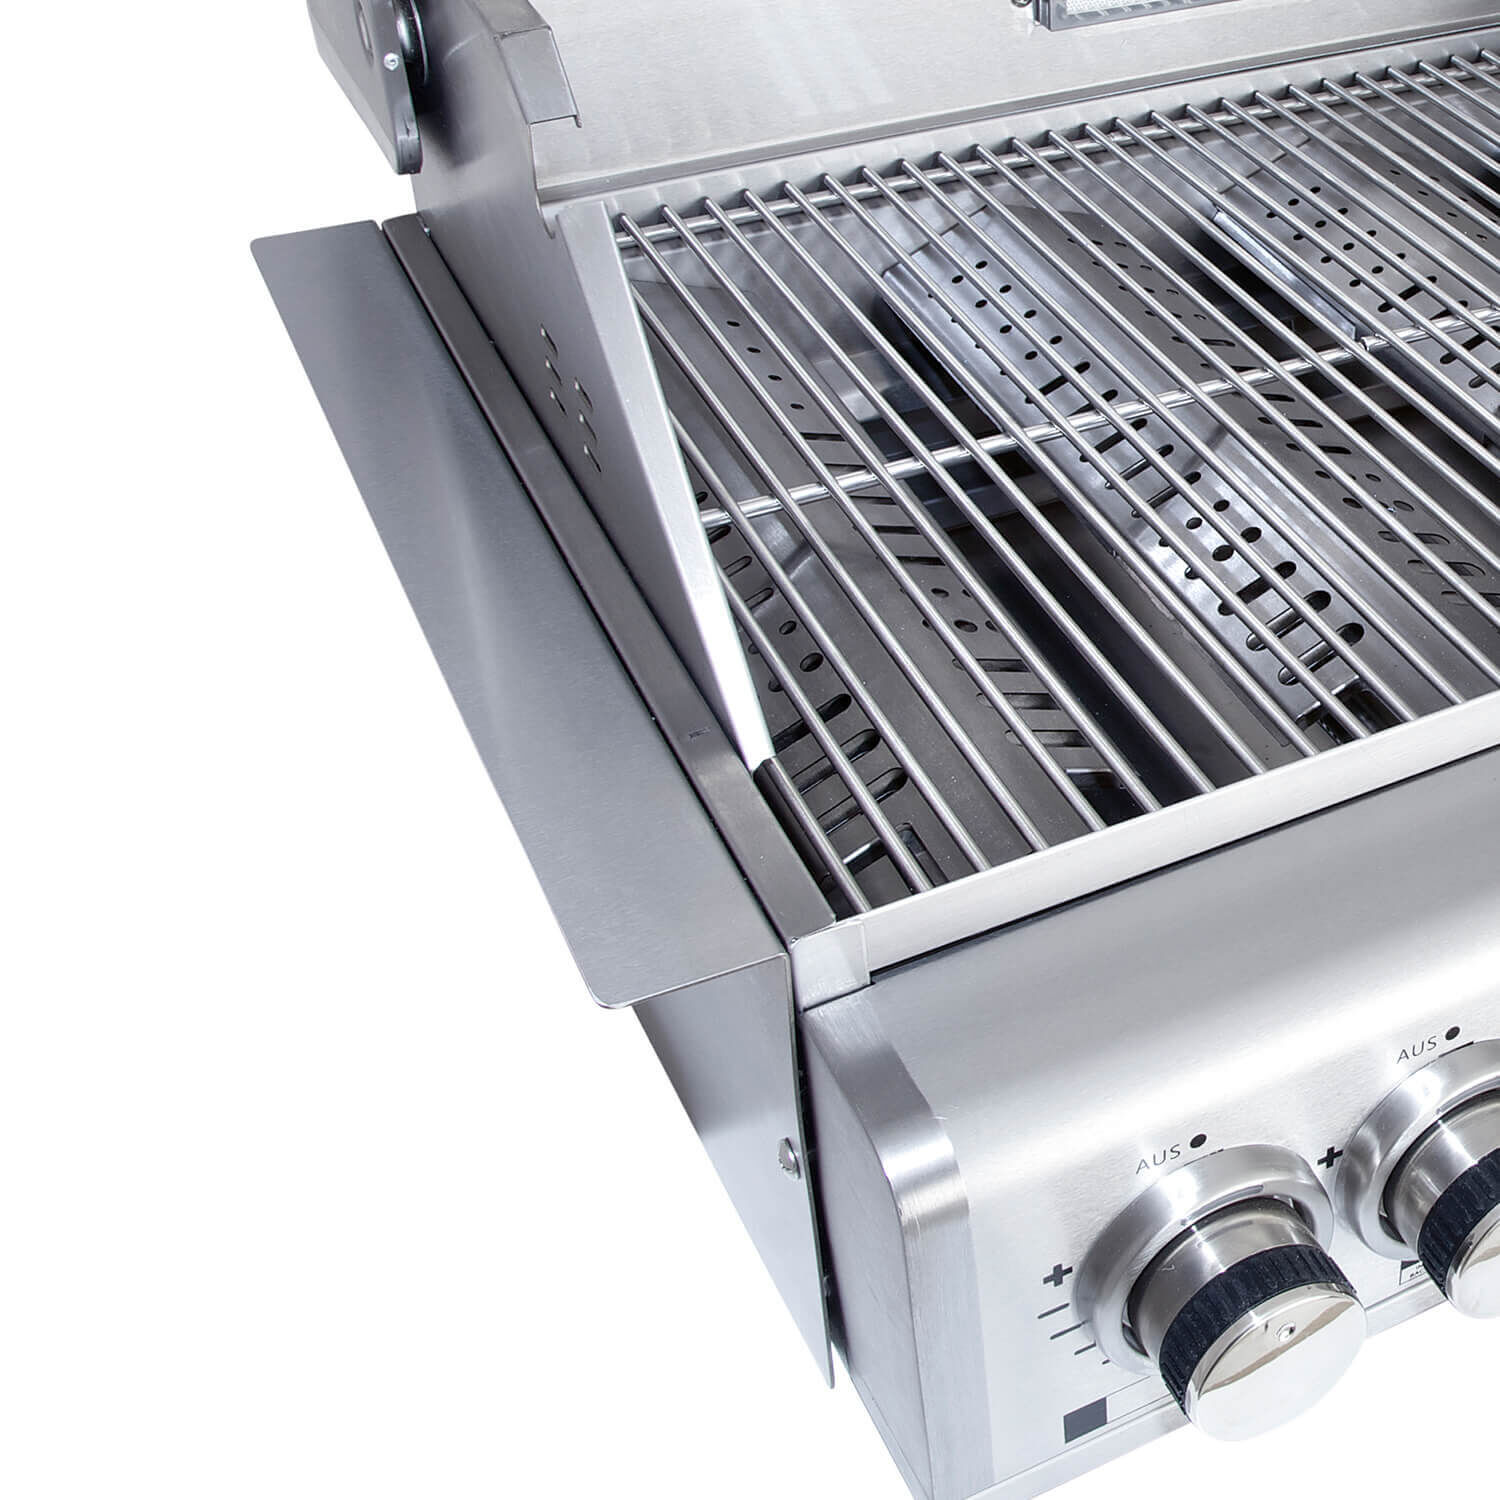 ALL'GRILL TOP-LINE - ALL'GRILL CHEF "S" - BUILT-IN mit Air System 100959